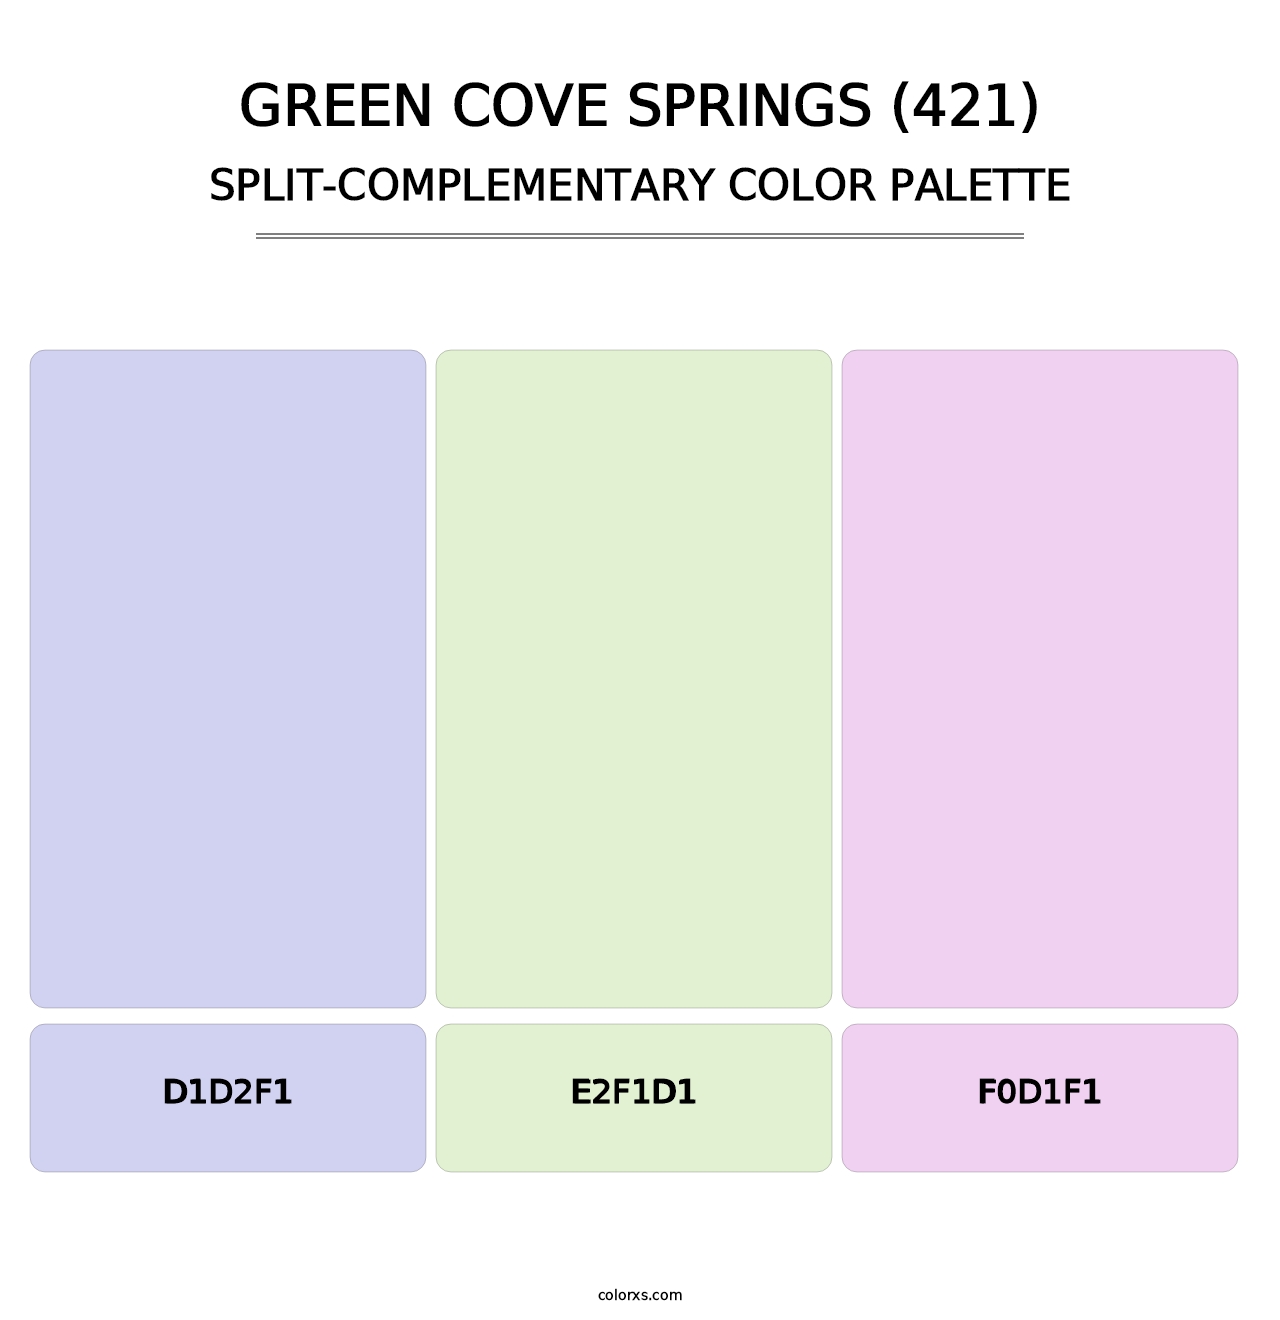 Green Cove Springs (421) - Split-Complementary Color Palette